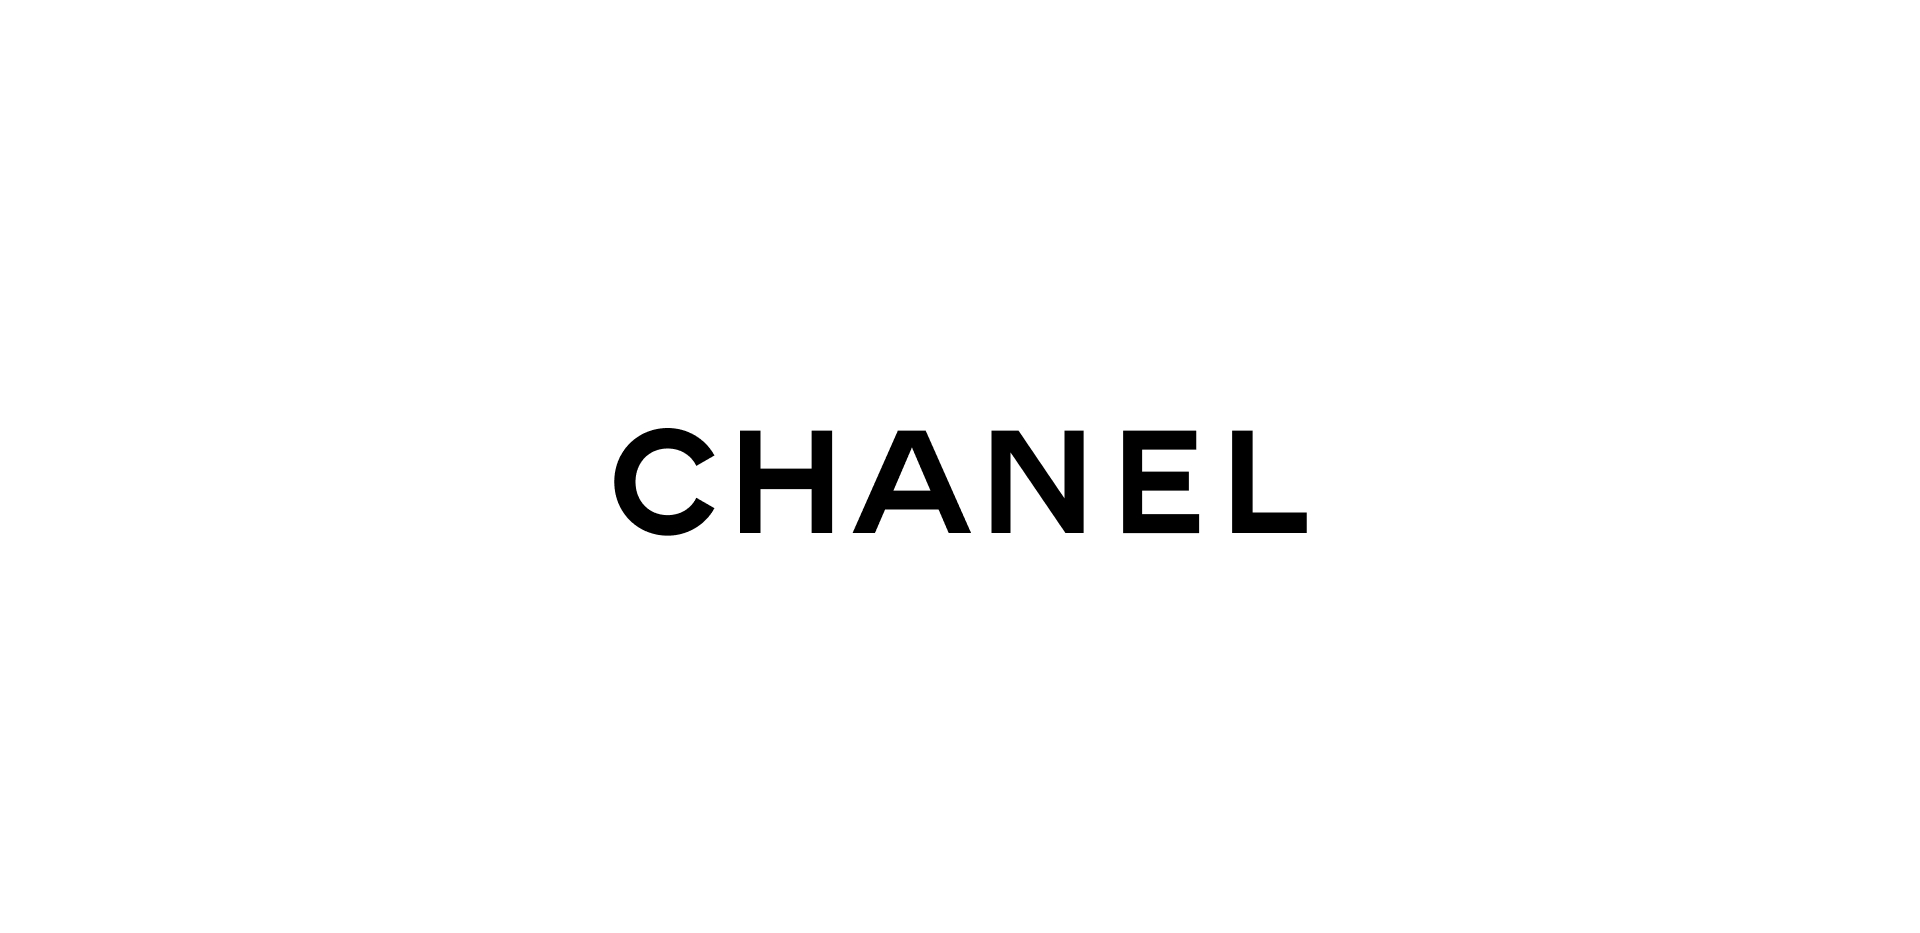 Chanel Logo Stock Vector Illustration and Royalty Free Chanel Logo Clipart